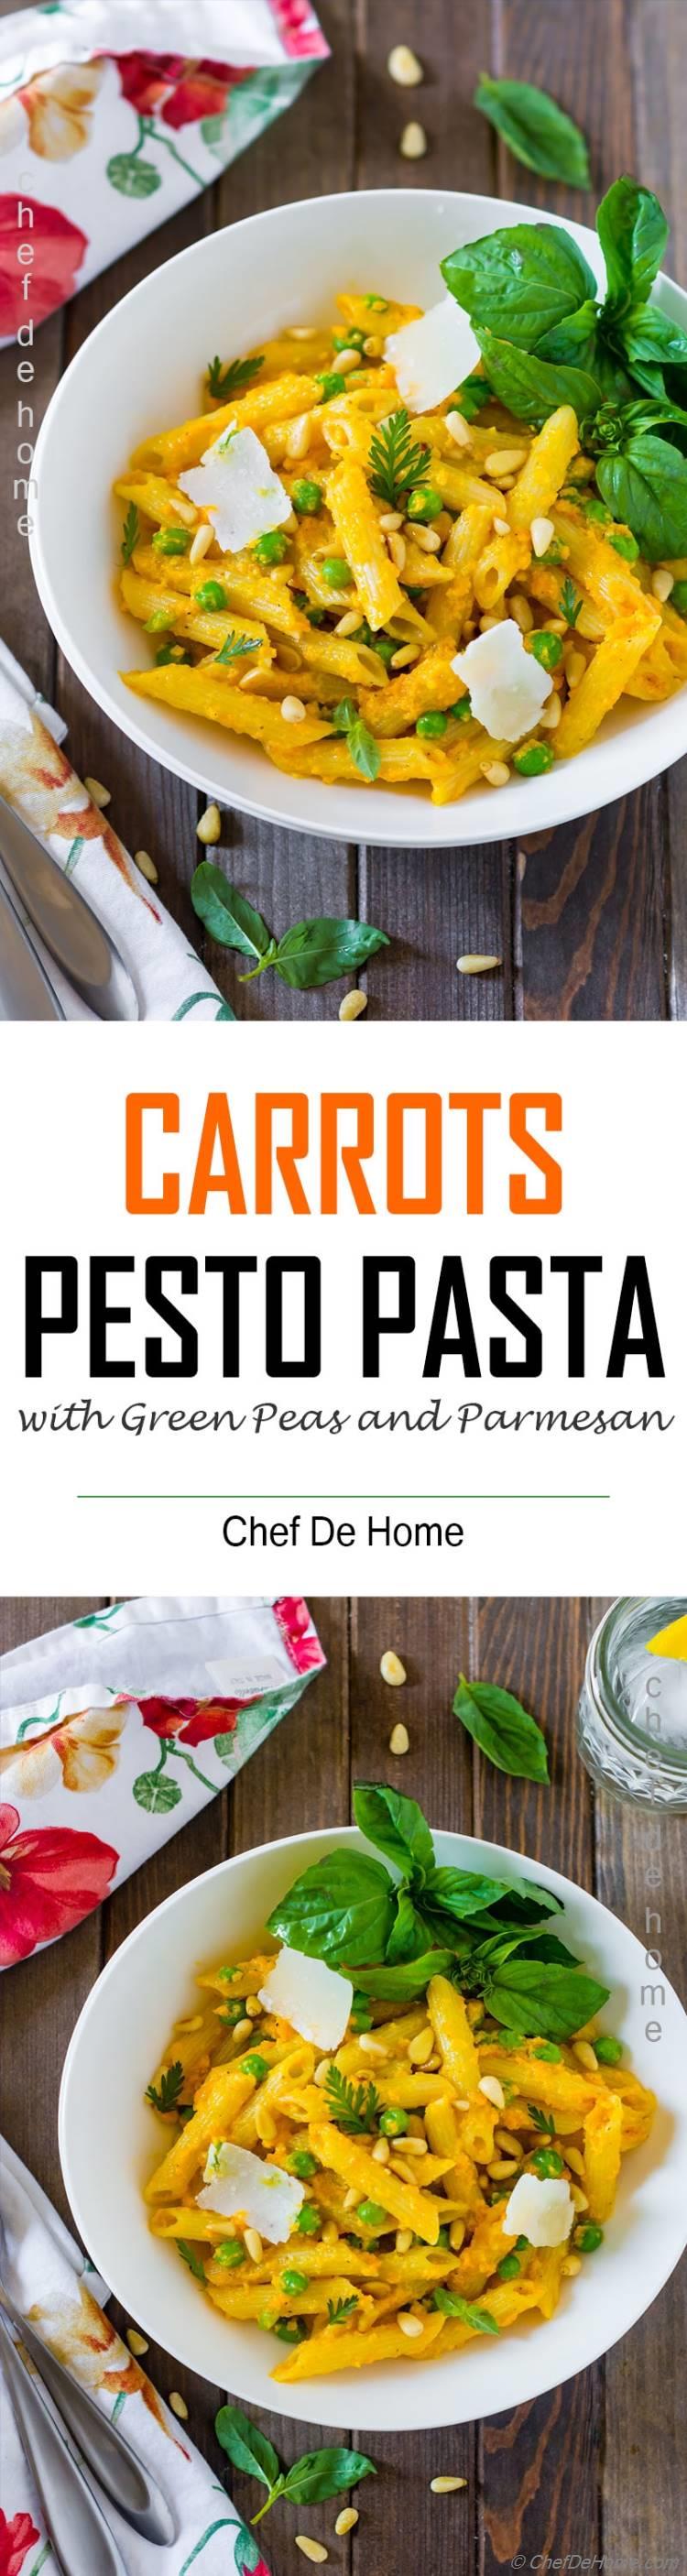 Creamy carrot pasta without creams or flour for weekday summer dinner